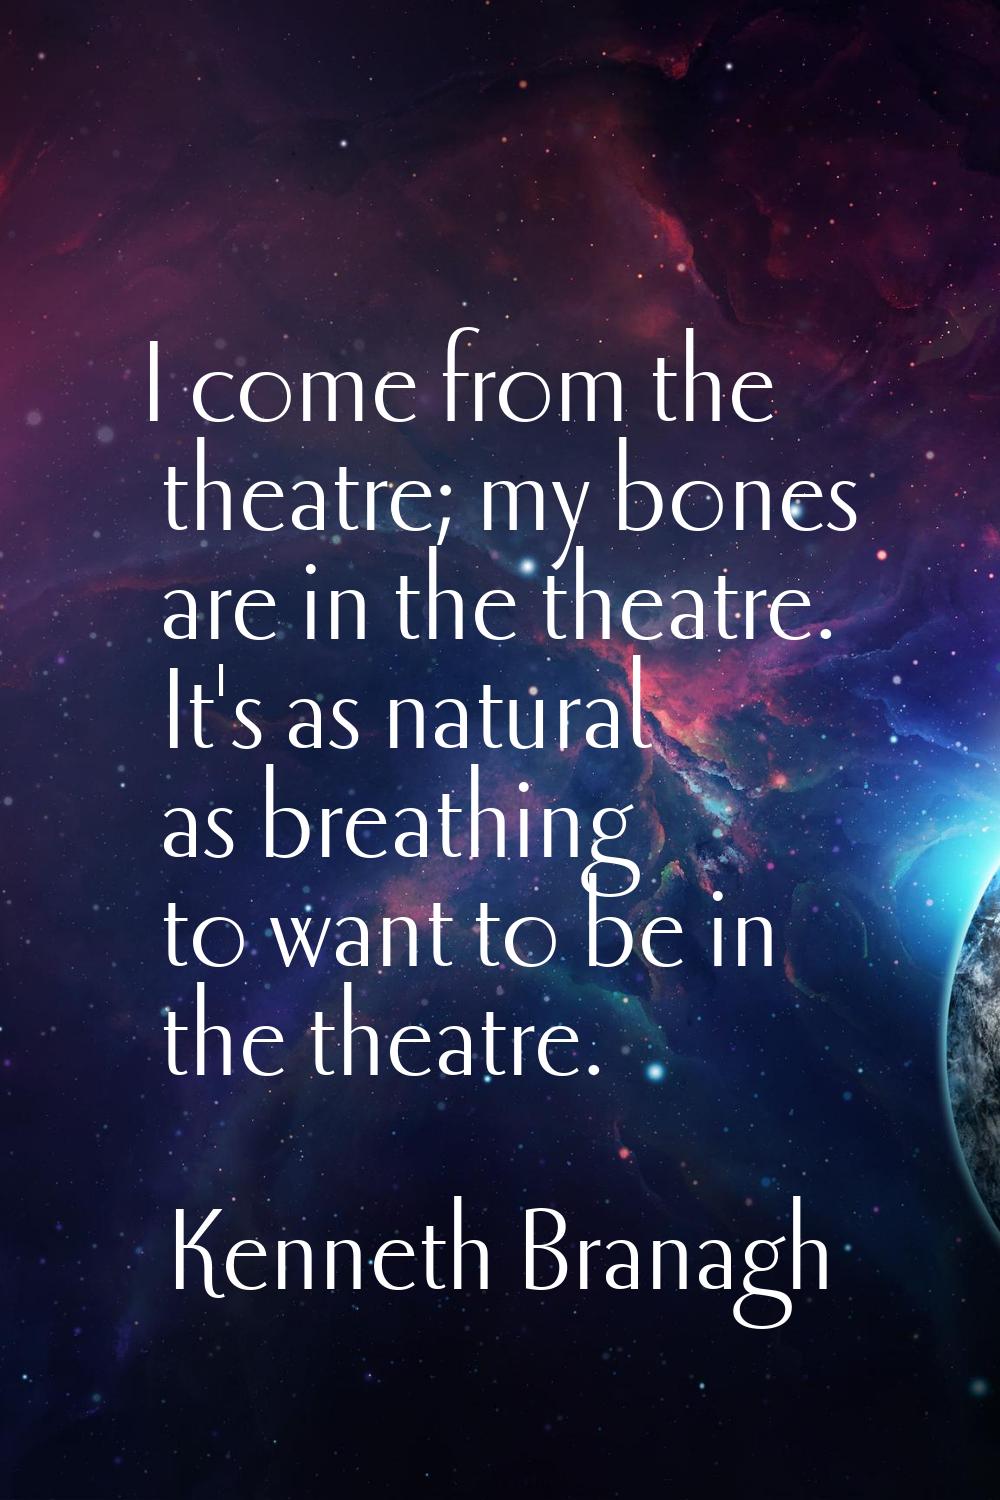 I come from the theatre; my bones are in the theatre. It's as natural as breathing to want to be in